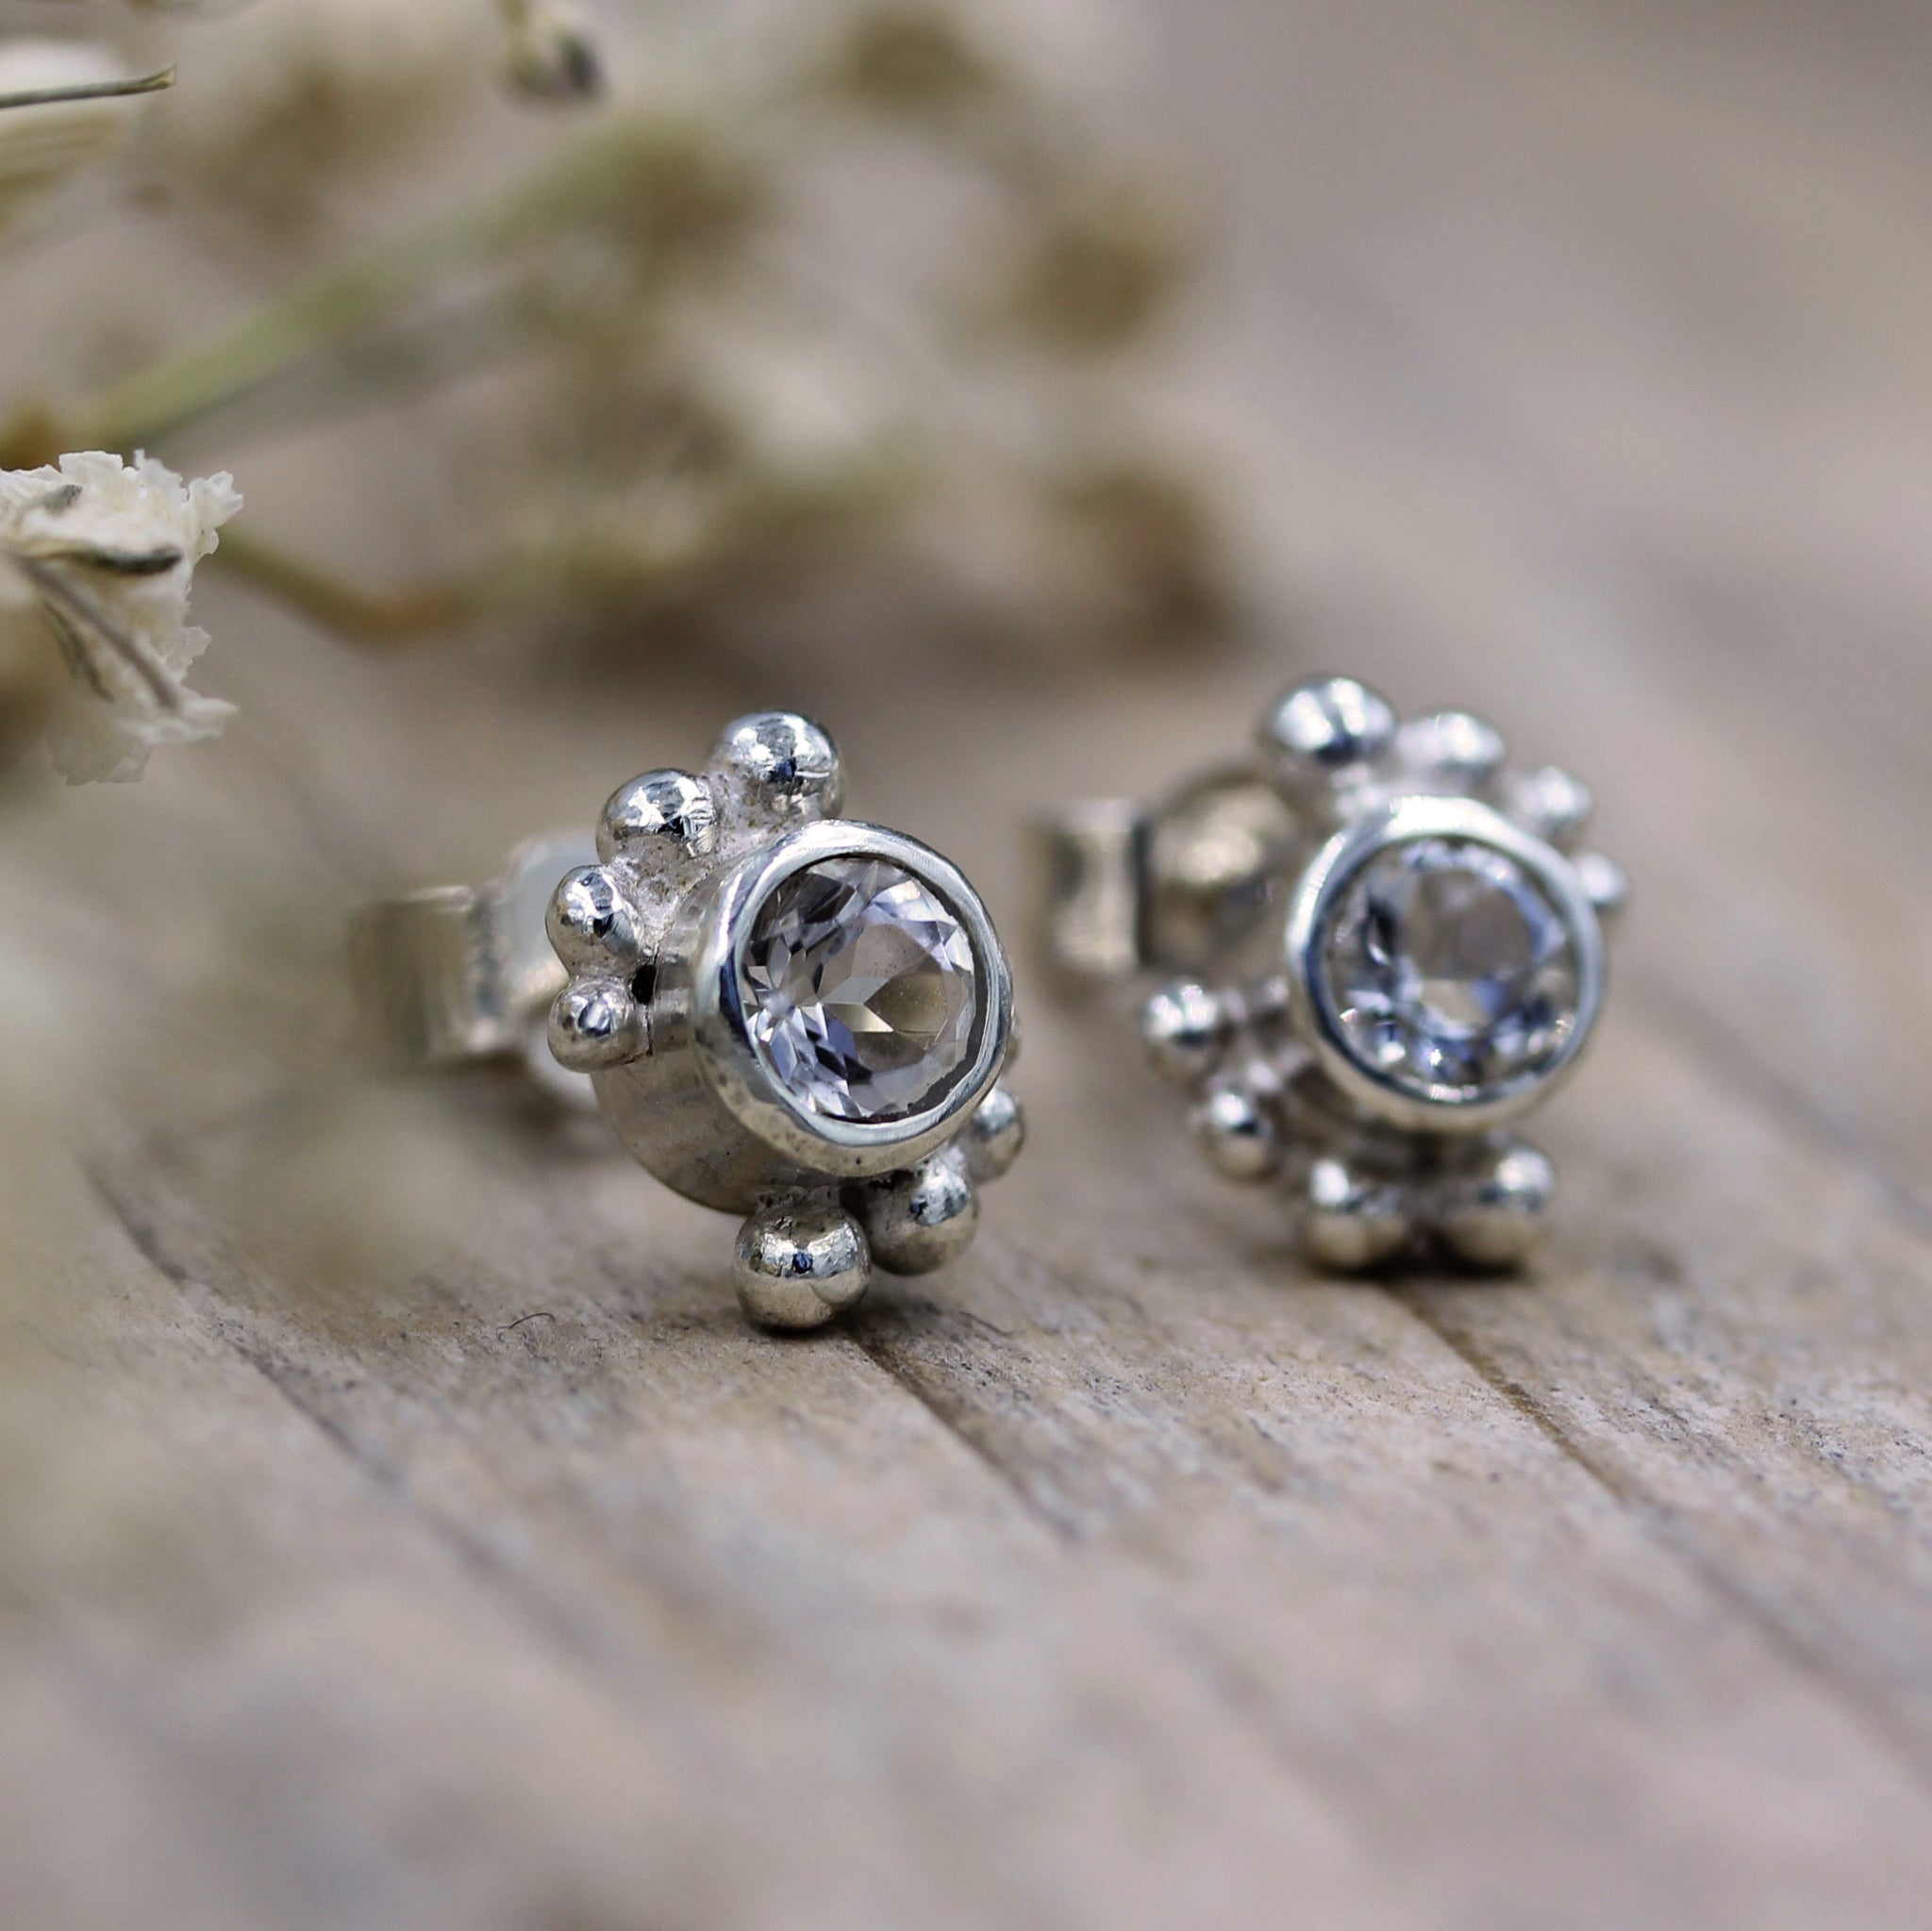 Handmade sea inspired earrings, made in 100% recycled silver and white topaz